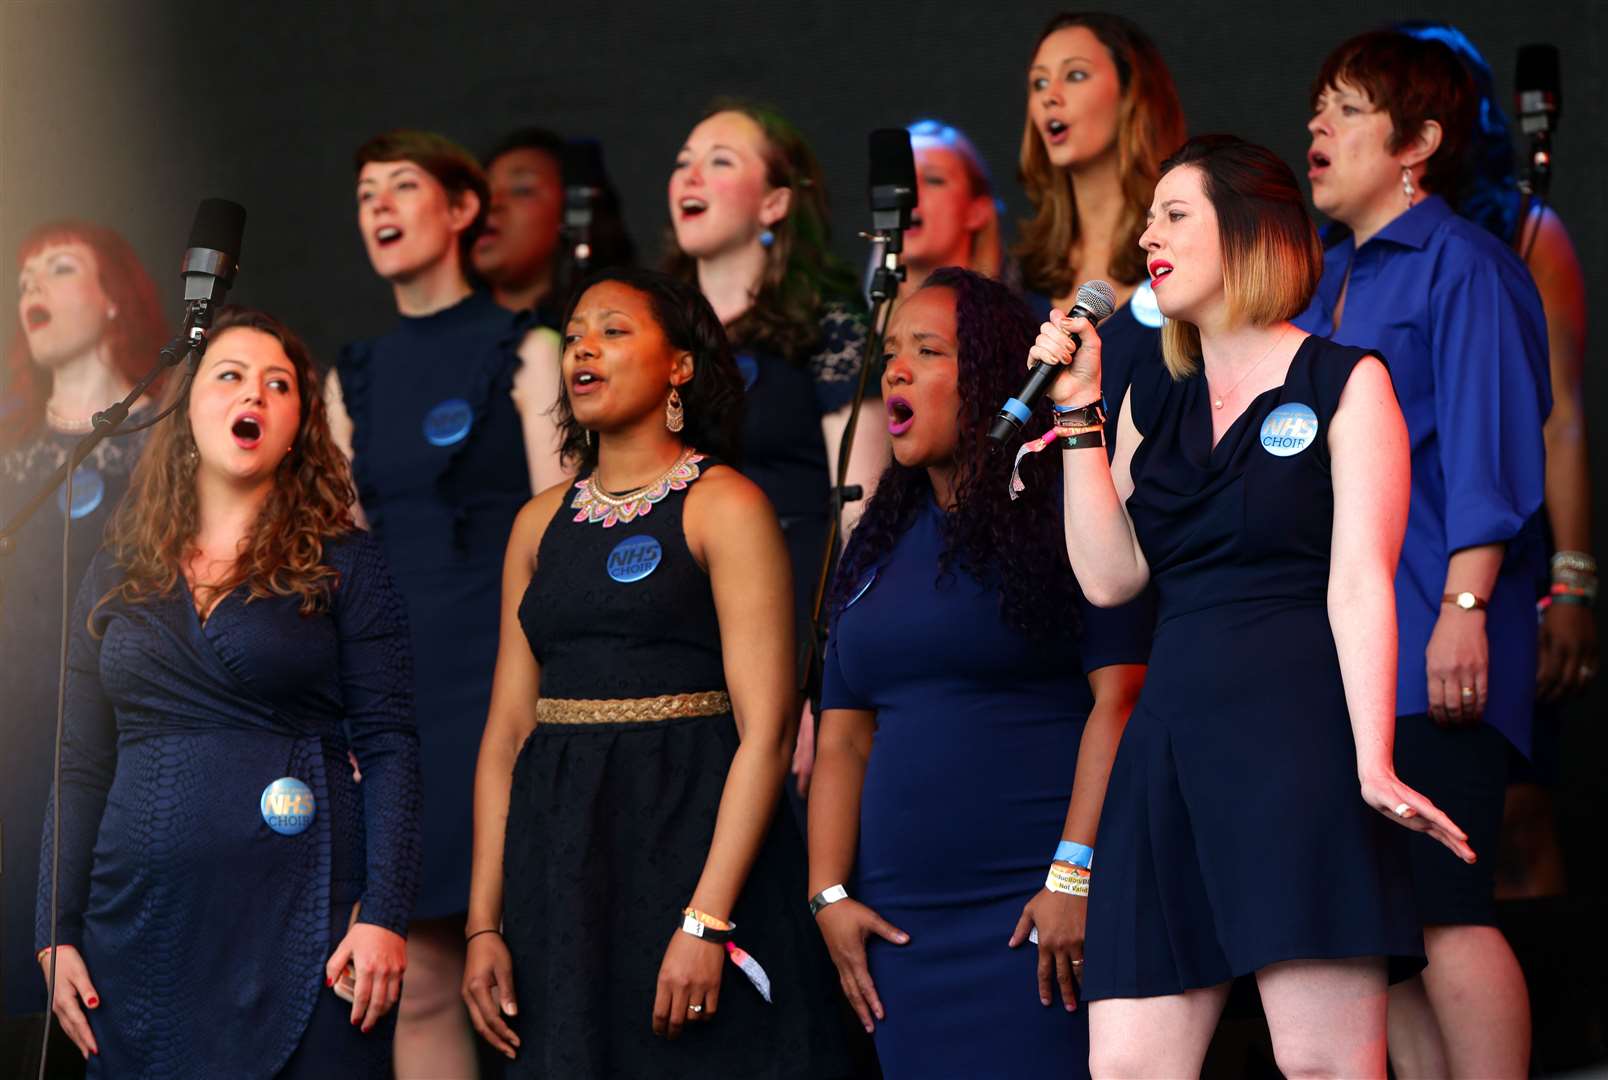 The Lewisham and Greenwich NHS Choir, pictured performing at the Glastonbury Festival, sang a carol during the Queen’s address (Yui Mok/PA)